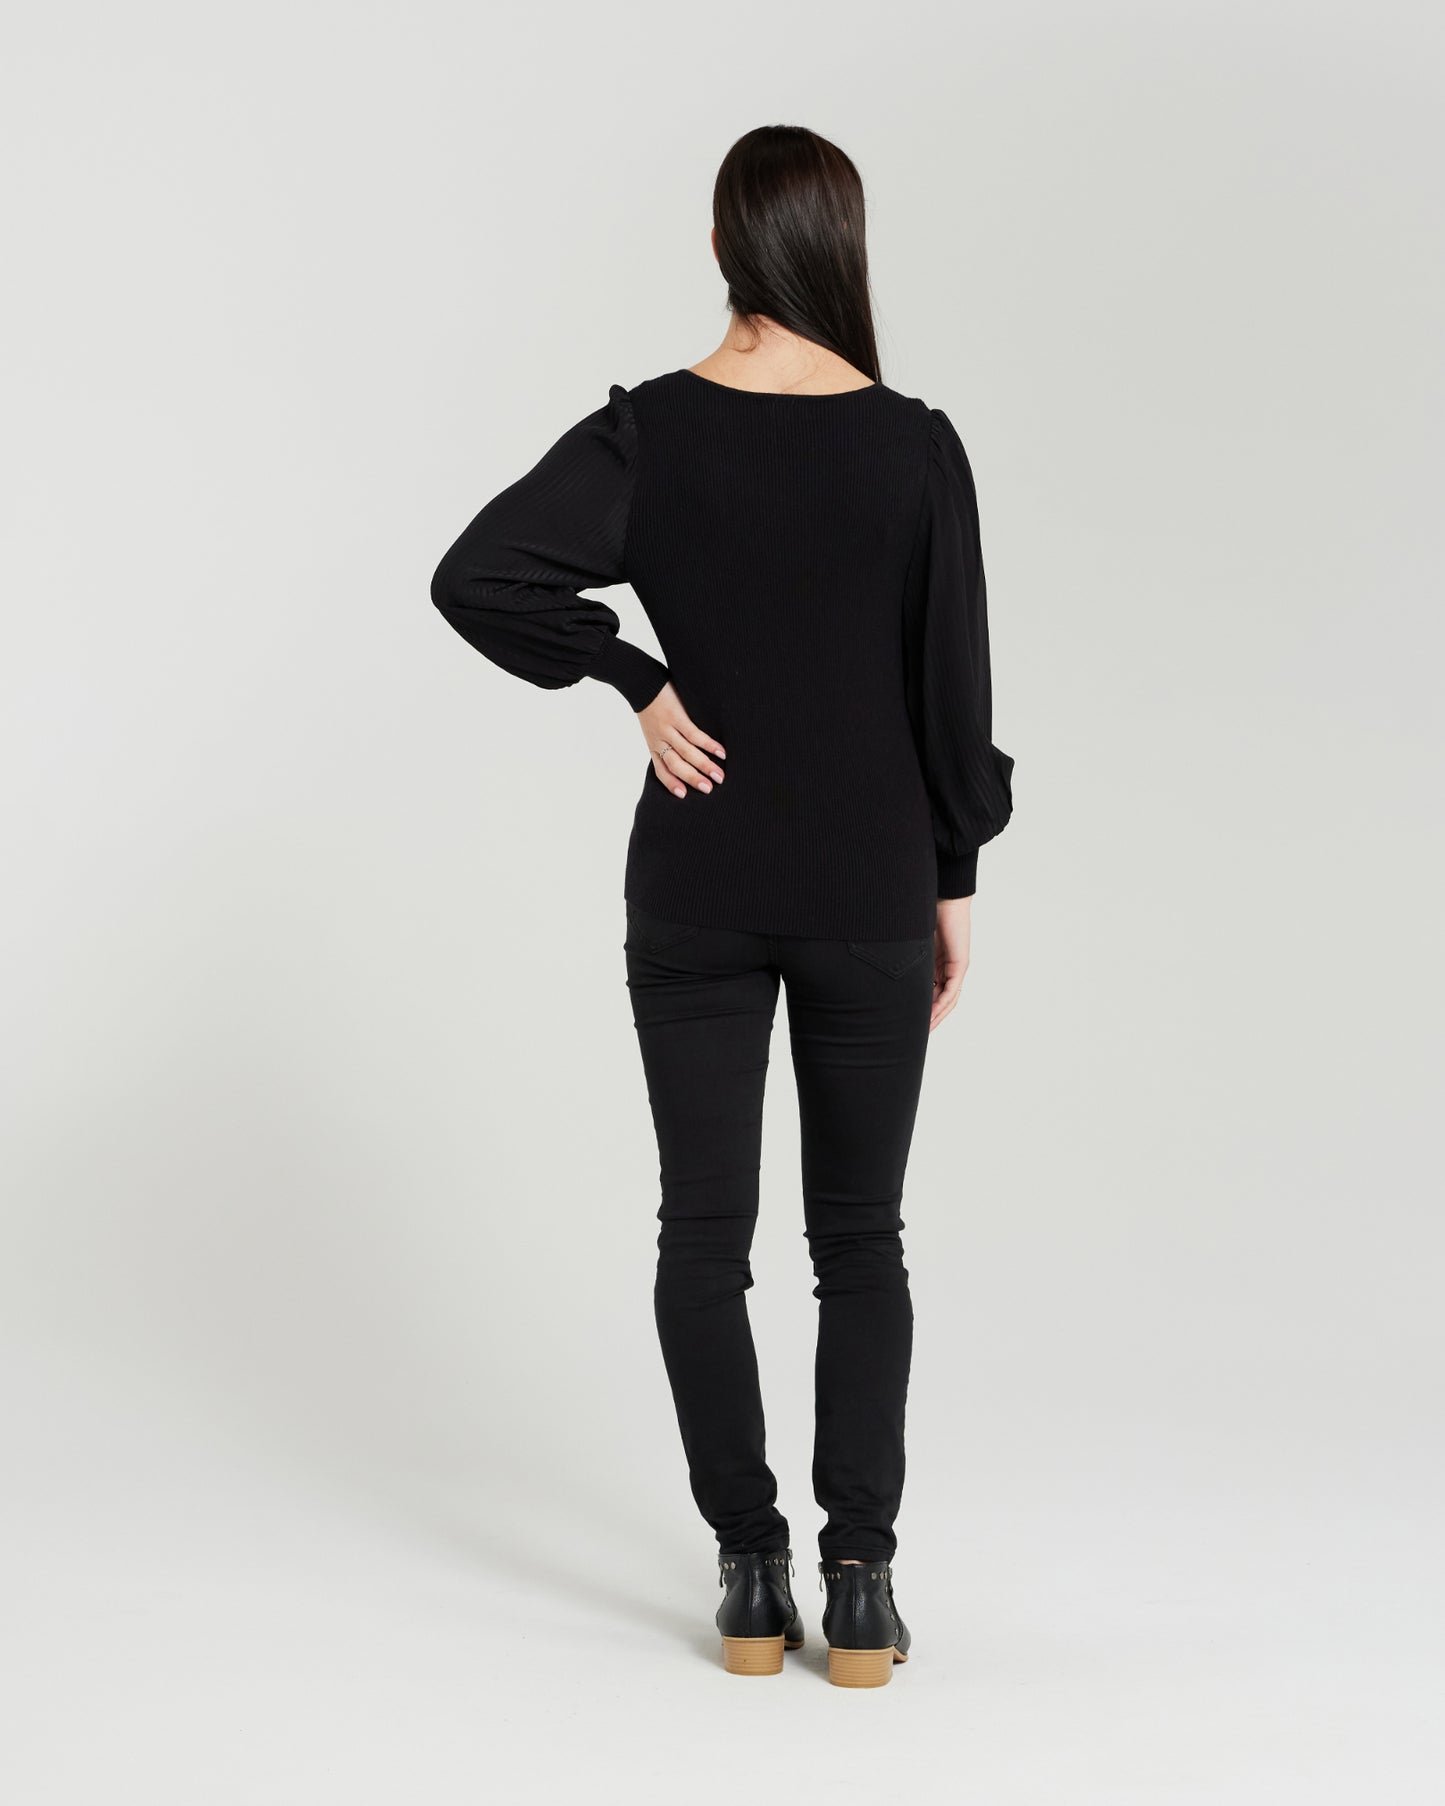 Zafina - Finley Top - Black -Due 1st March